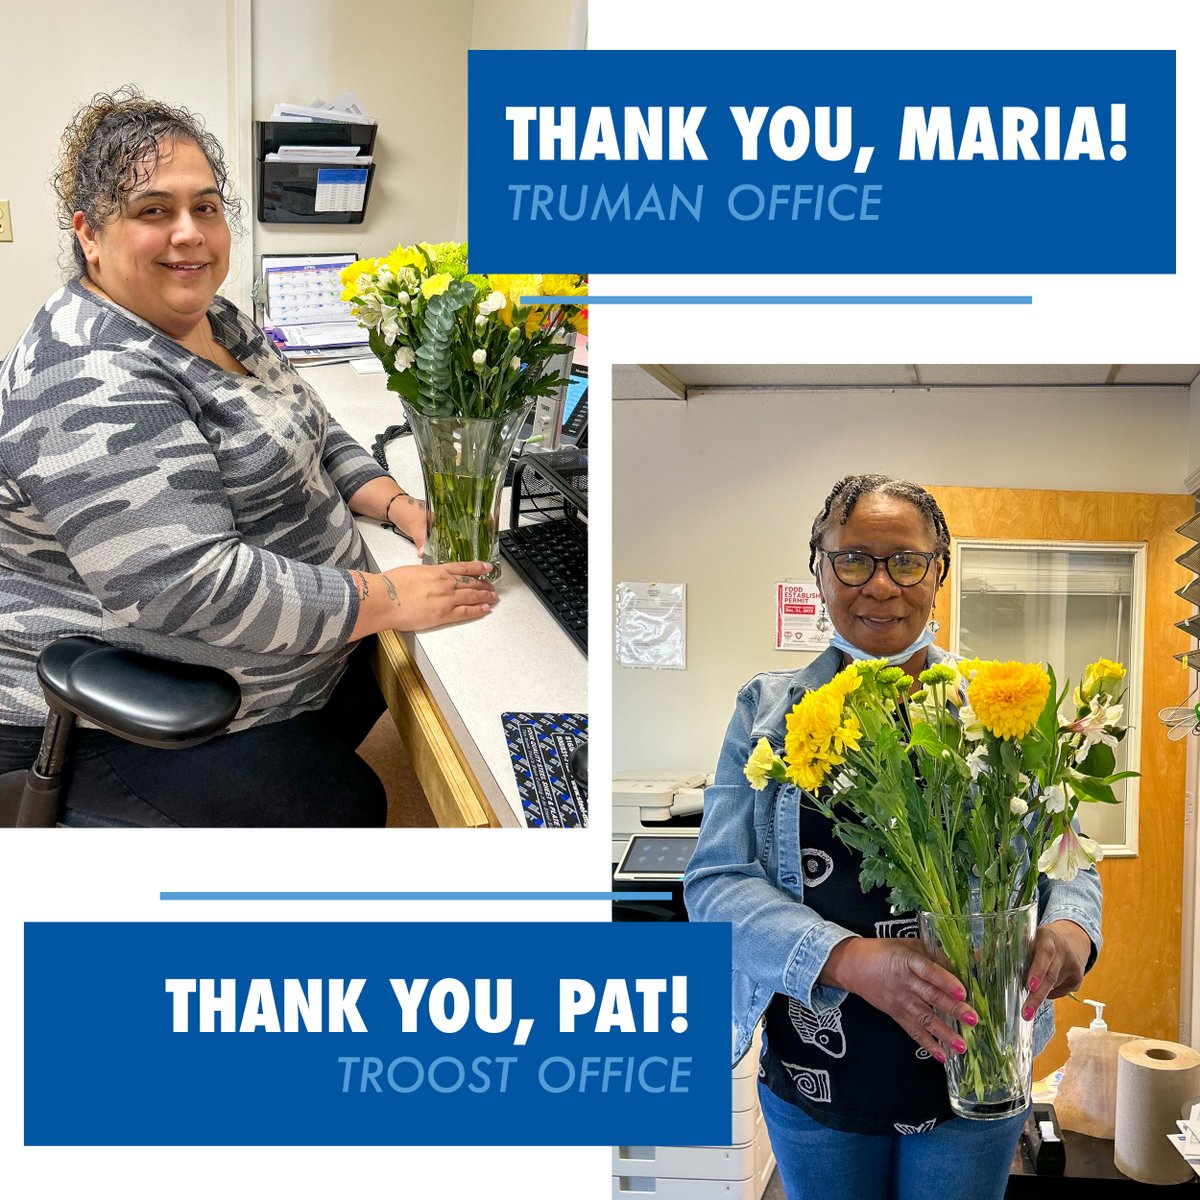 Thank you to our incredible receptionists, Maria & Pat! Both have been serving our mission for over a decade, and they're often the first point of contact for many of our neighbors experiencing hardship. Happy #AdministrativeProfessionalsDay! Thank you for all you do!